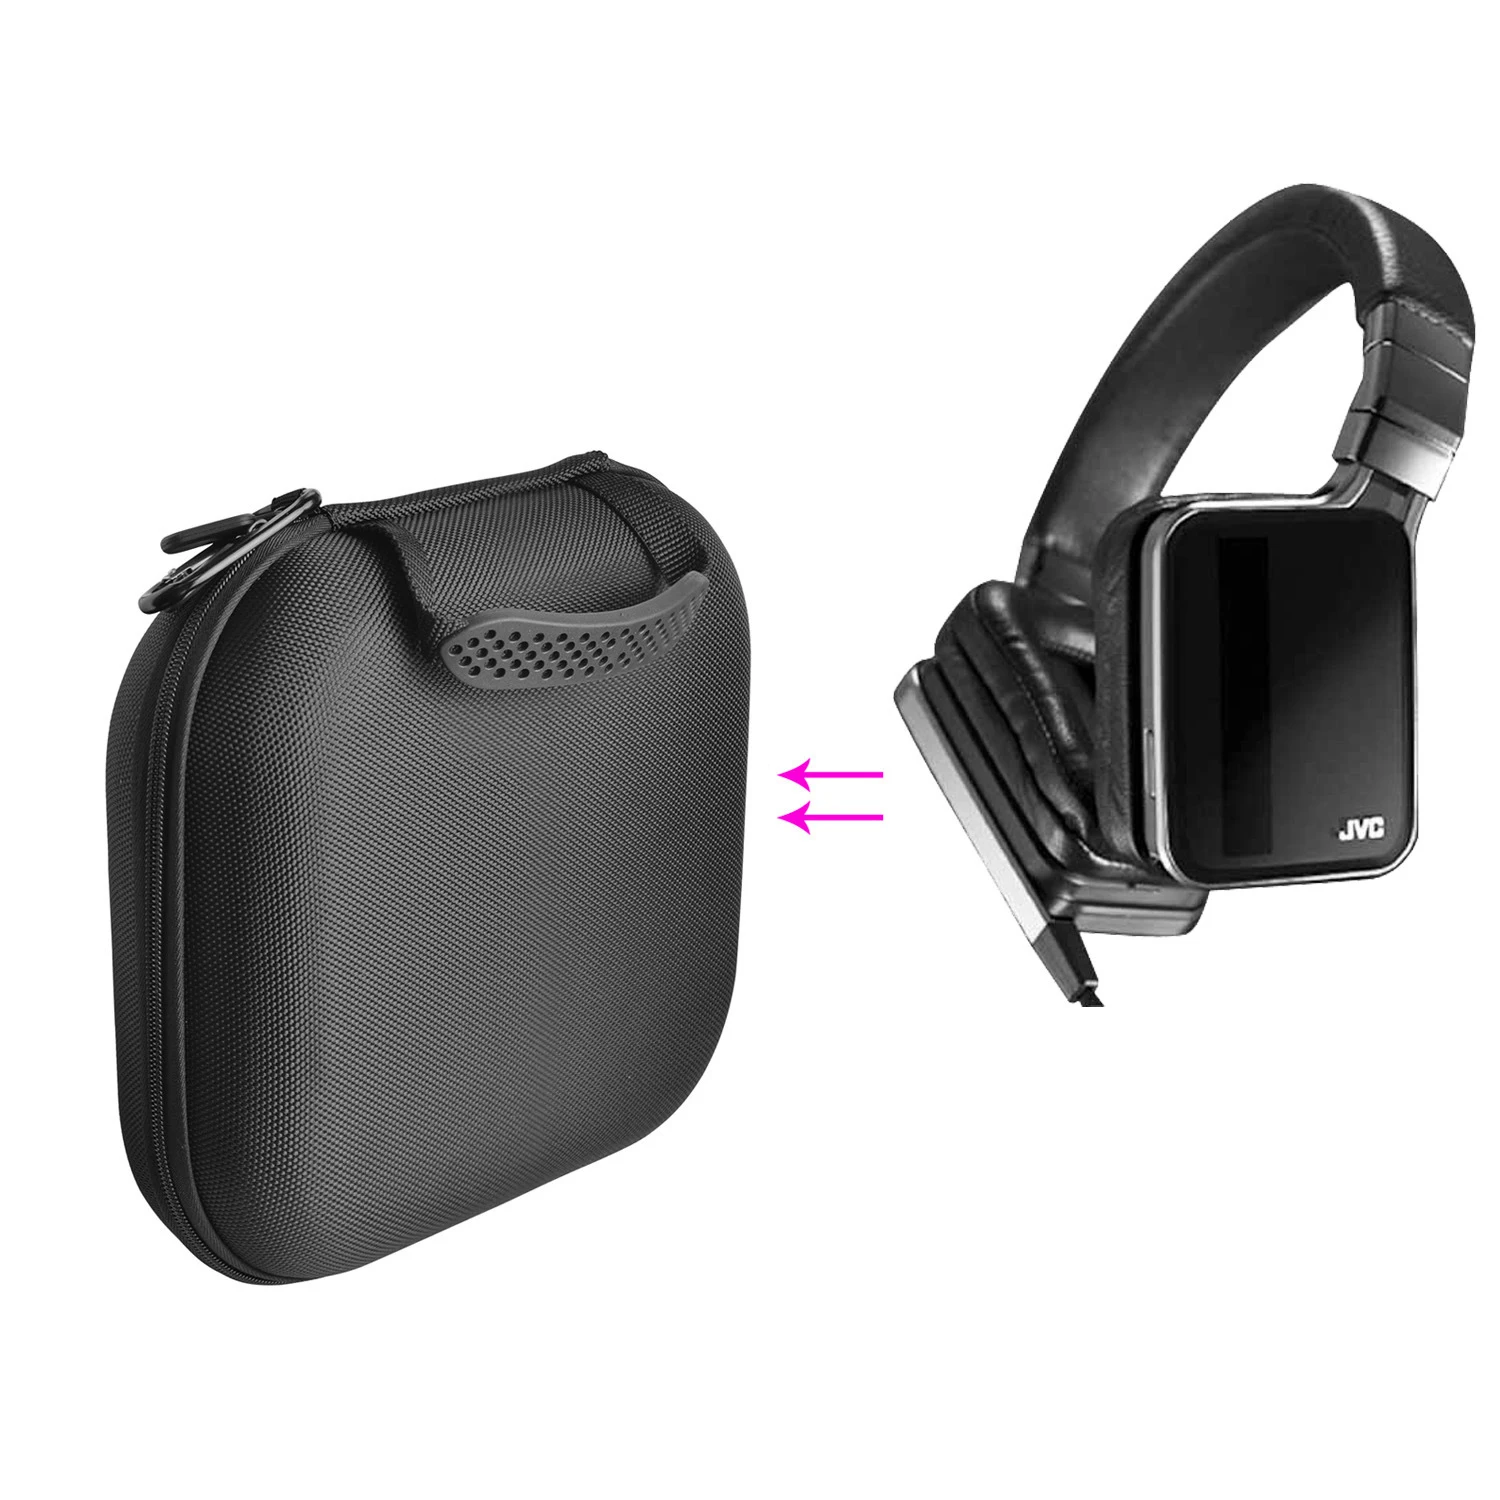 KZ Shockproof Traveling Storage Case Pouch Bag Zipper Cover For Headset Earphone